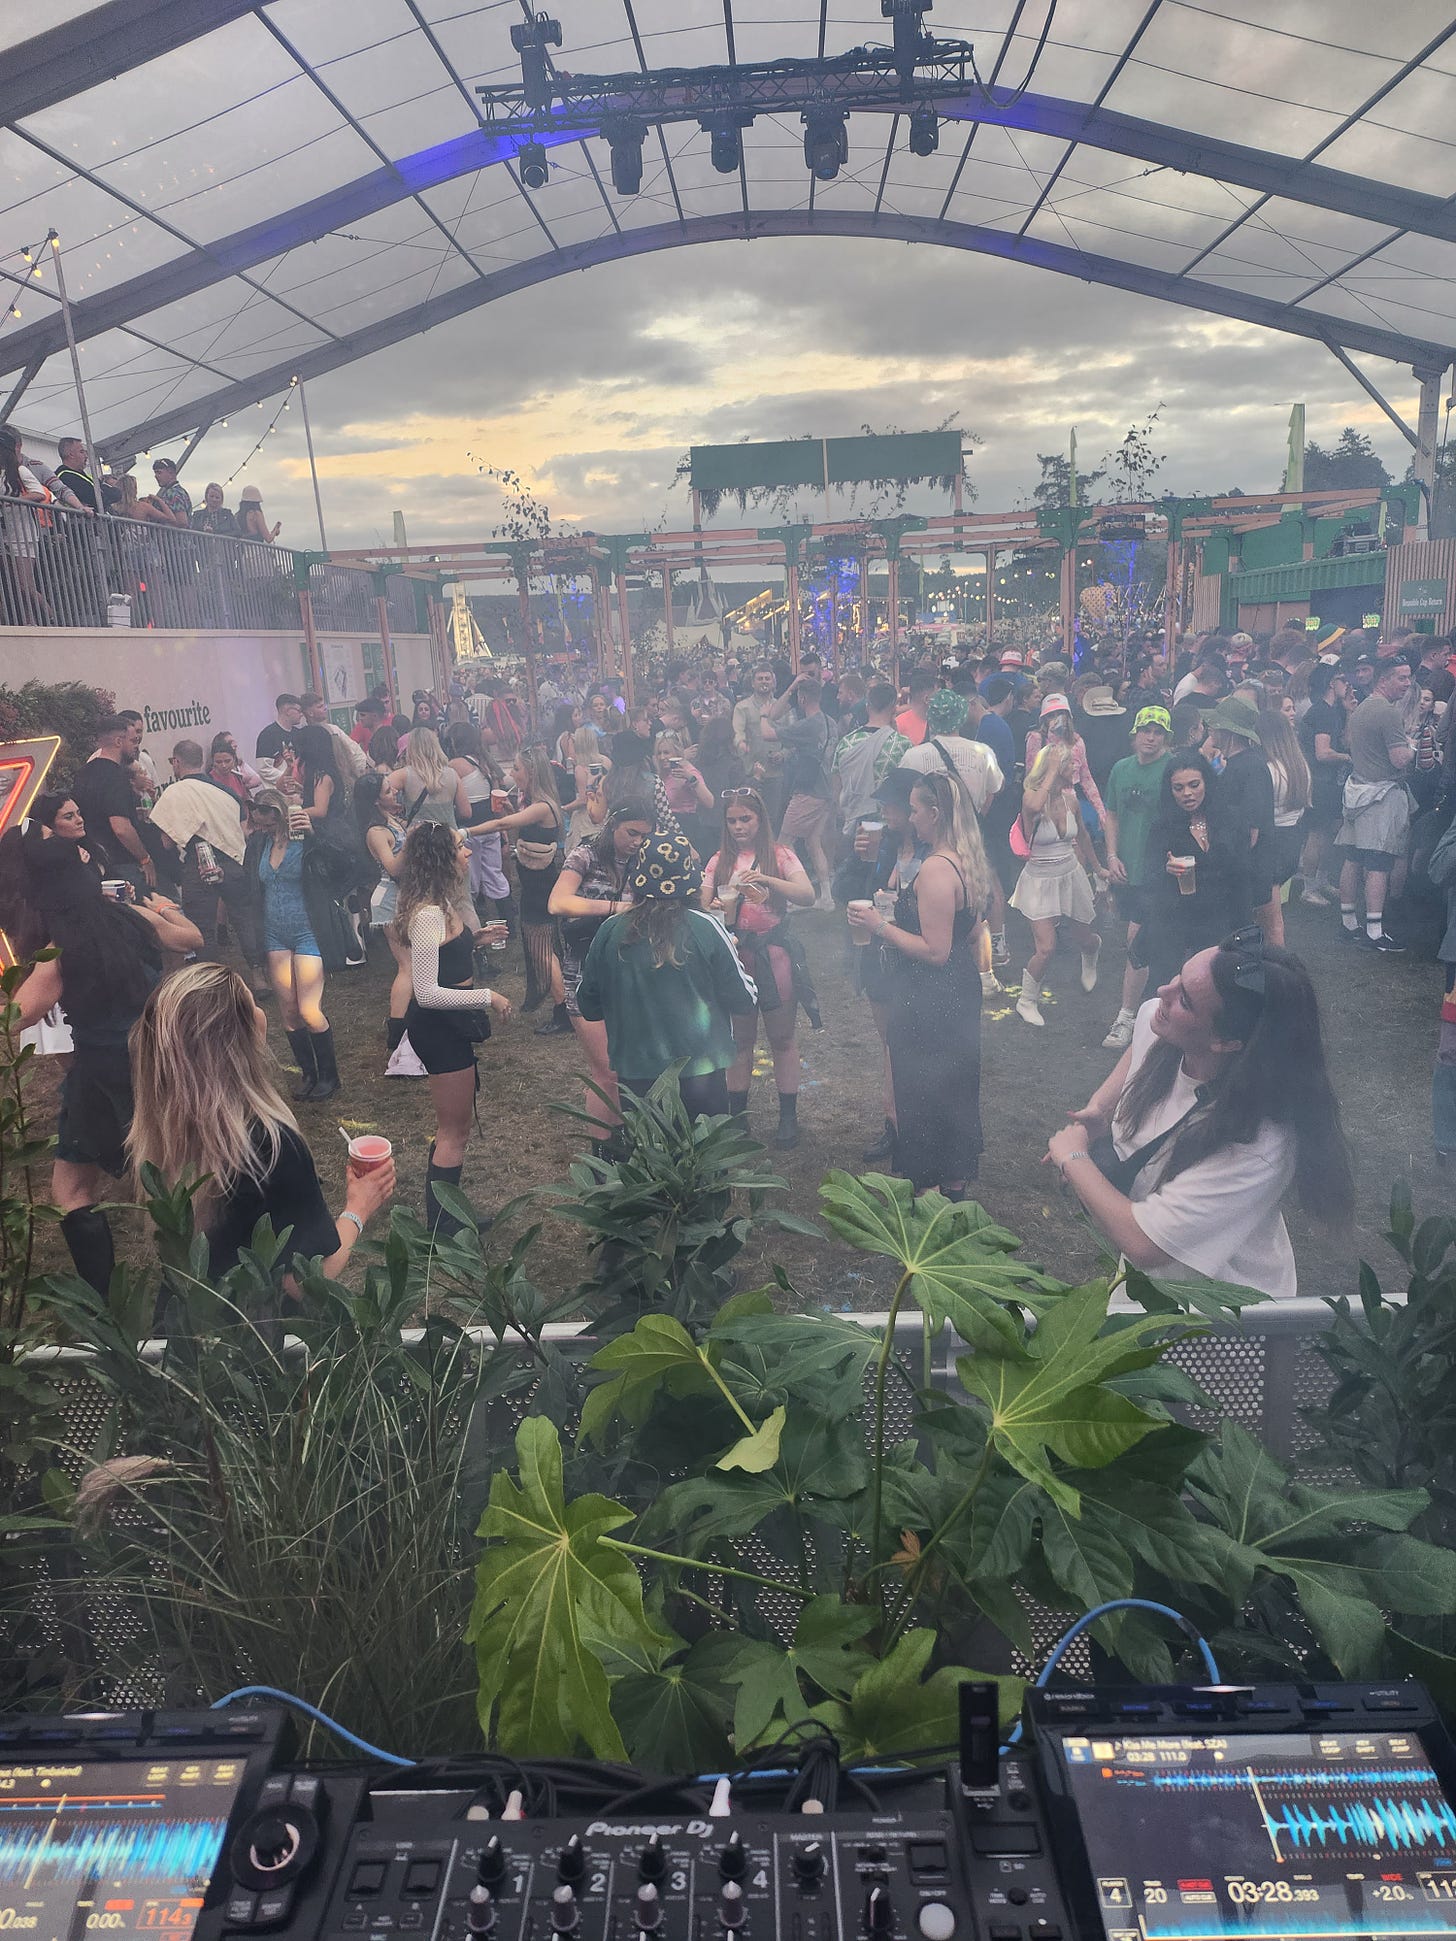 Taken from the stage and from behind a set of DJ decks, the photo shows a bunch of people (mostly gals) dancing in a Heineken branded tent. It's like a giant glasshouse, with a VIP area overlooking the dance floor. The sun sets on what feels like the first dry festival this summer. 